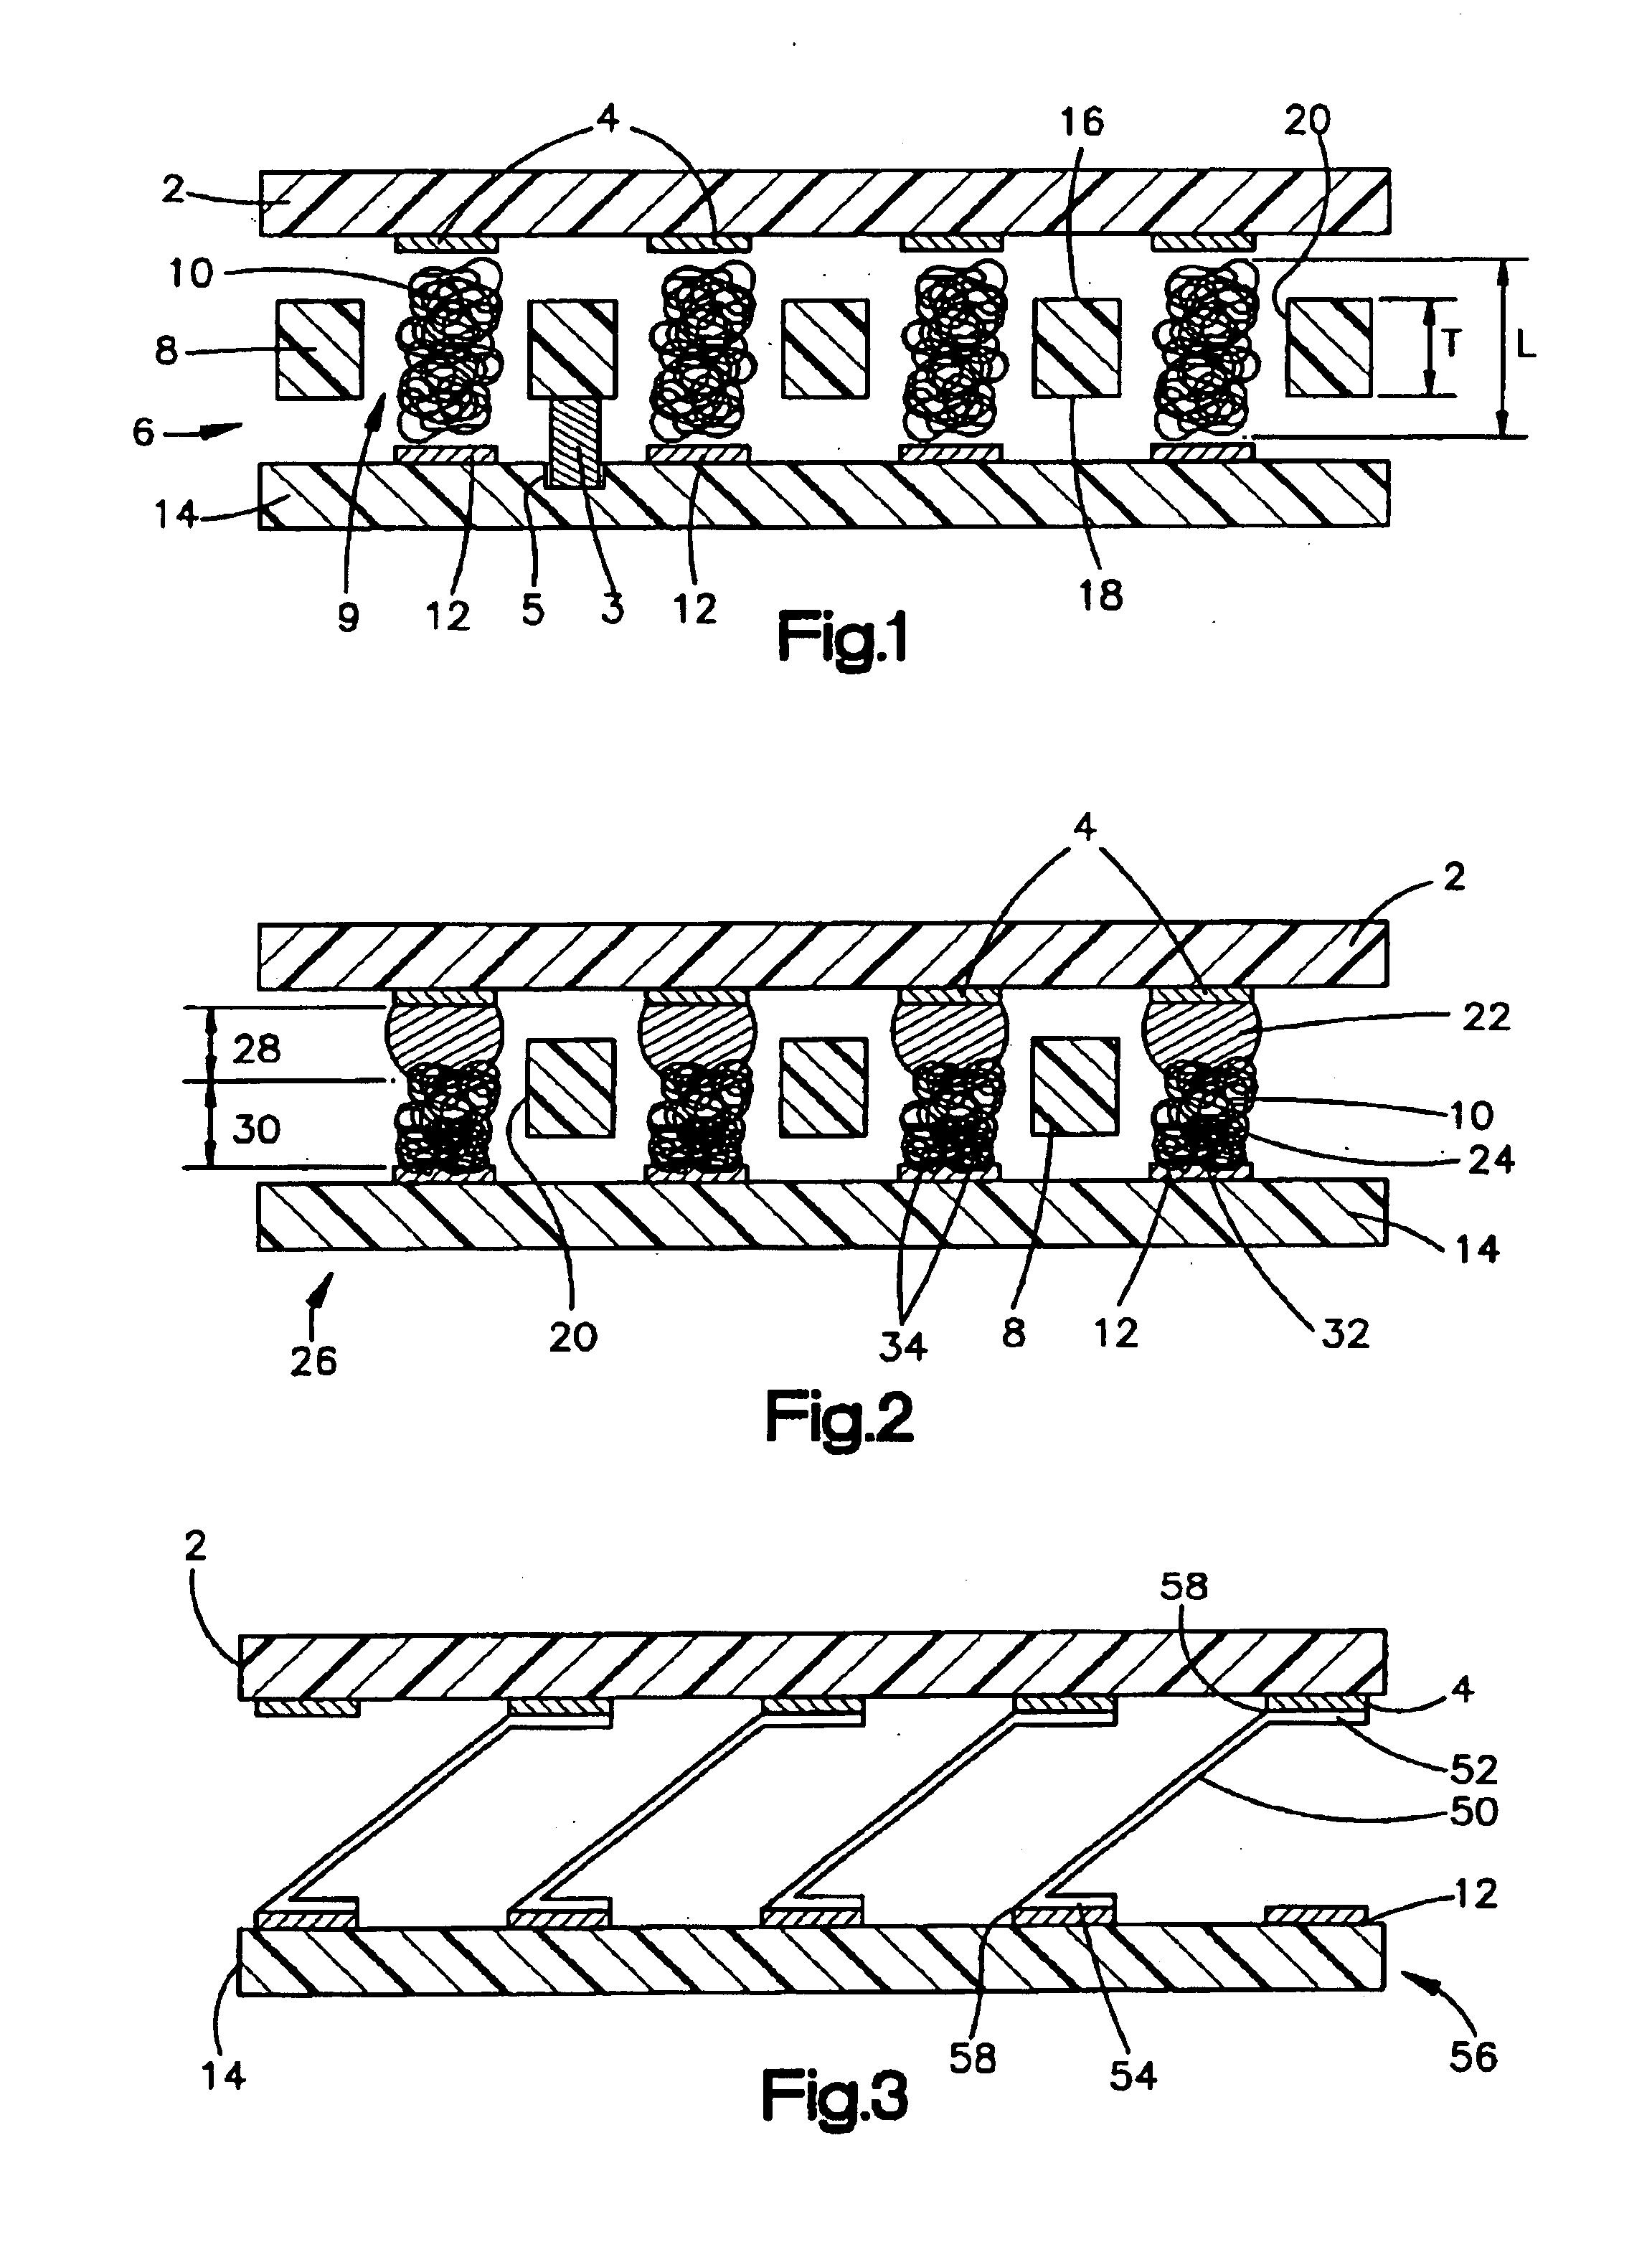 Enhanced electrical/mechanical connection for electronic devices